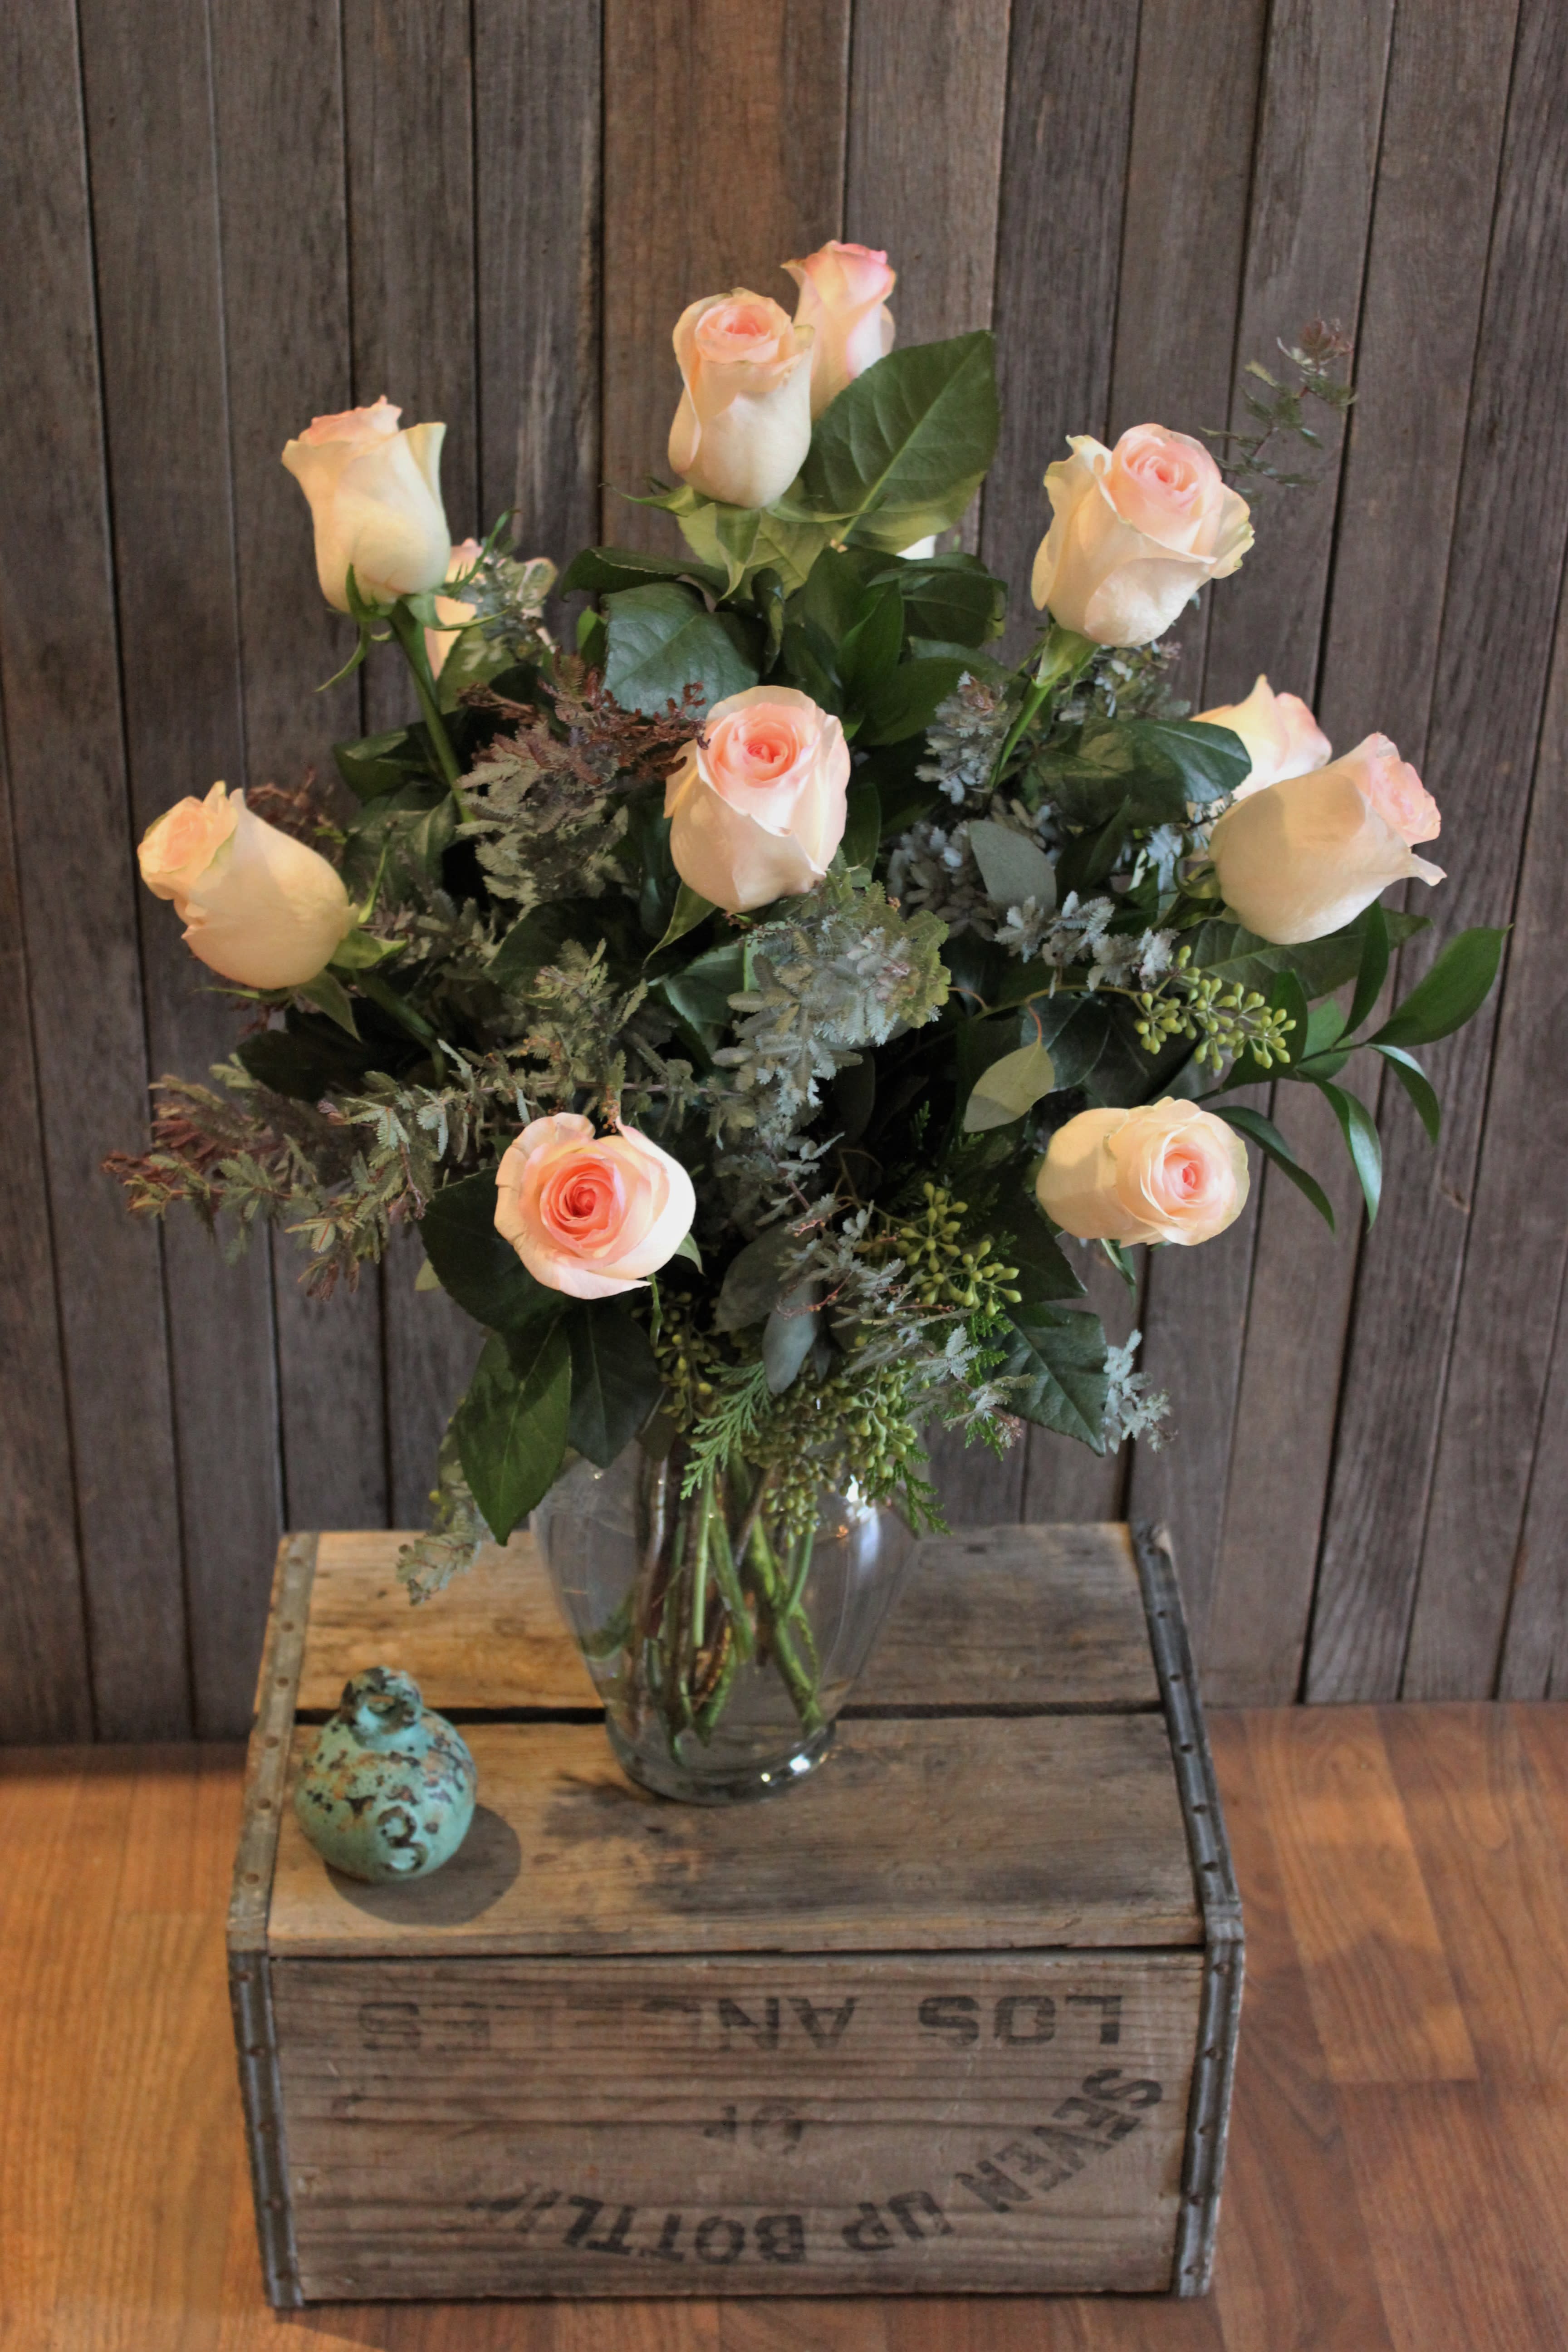 Traditional Dozen - Pastel  - The freshest and most beautiful pale-colored roses we can find, designed in a vase.  Please indicate color preference in &quot;special instructions&quot; and we'll do our best to get that color - best to list a 2nd choice option as well.